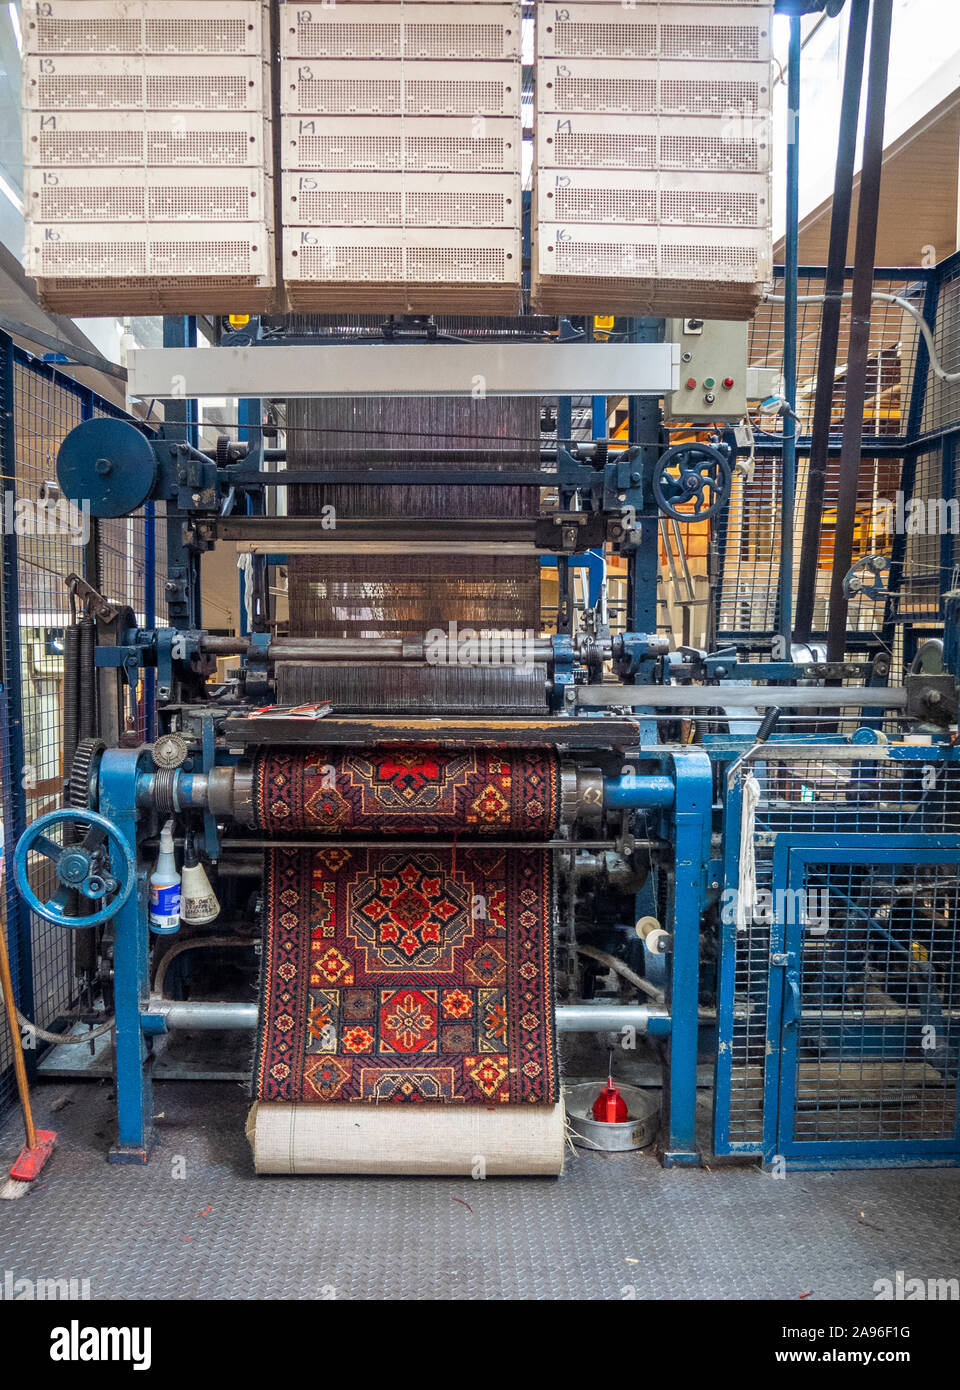 Exhibition vintage mechanical machinery Axminster gripper loom using Jacquard system at National Wool Museum Geelong Victoria Australia. Stock Photo